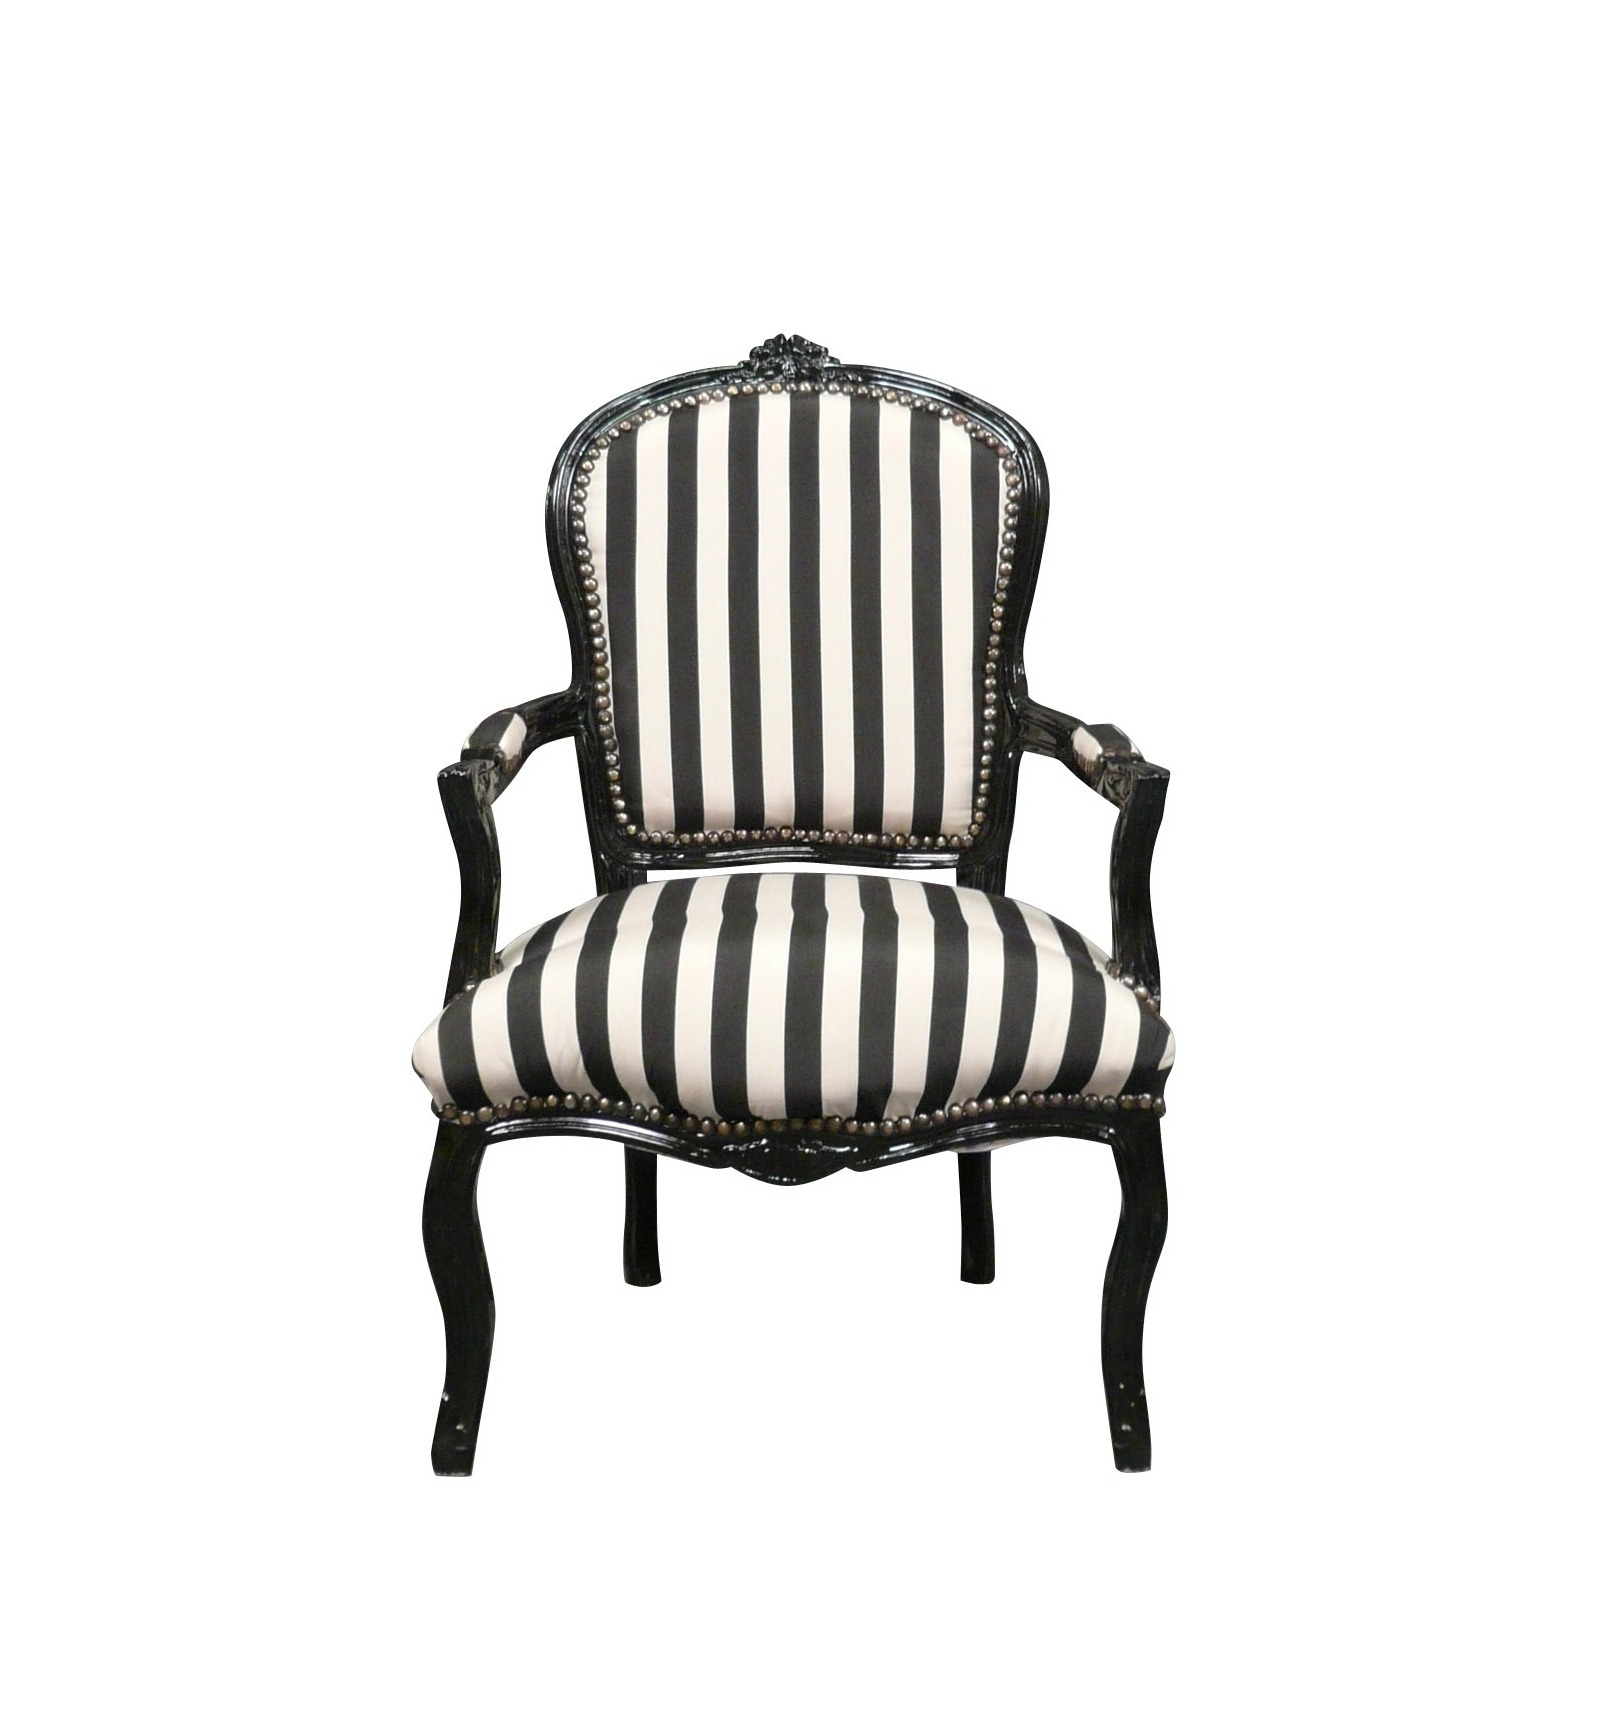 Louis Xv Armchair With Black And White, Black And White Striped Vanity Chair